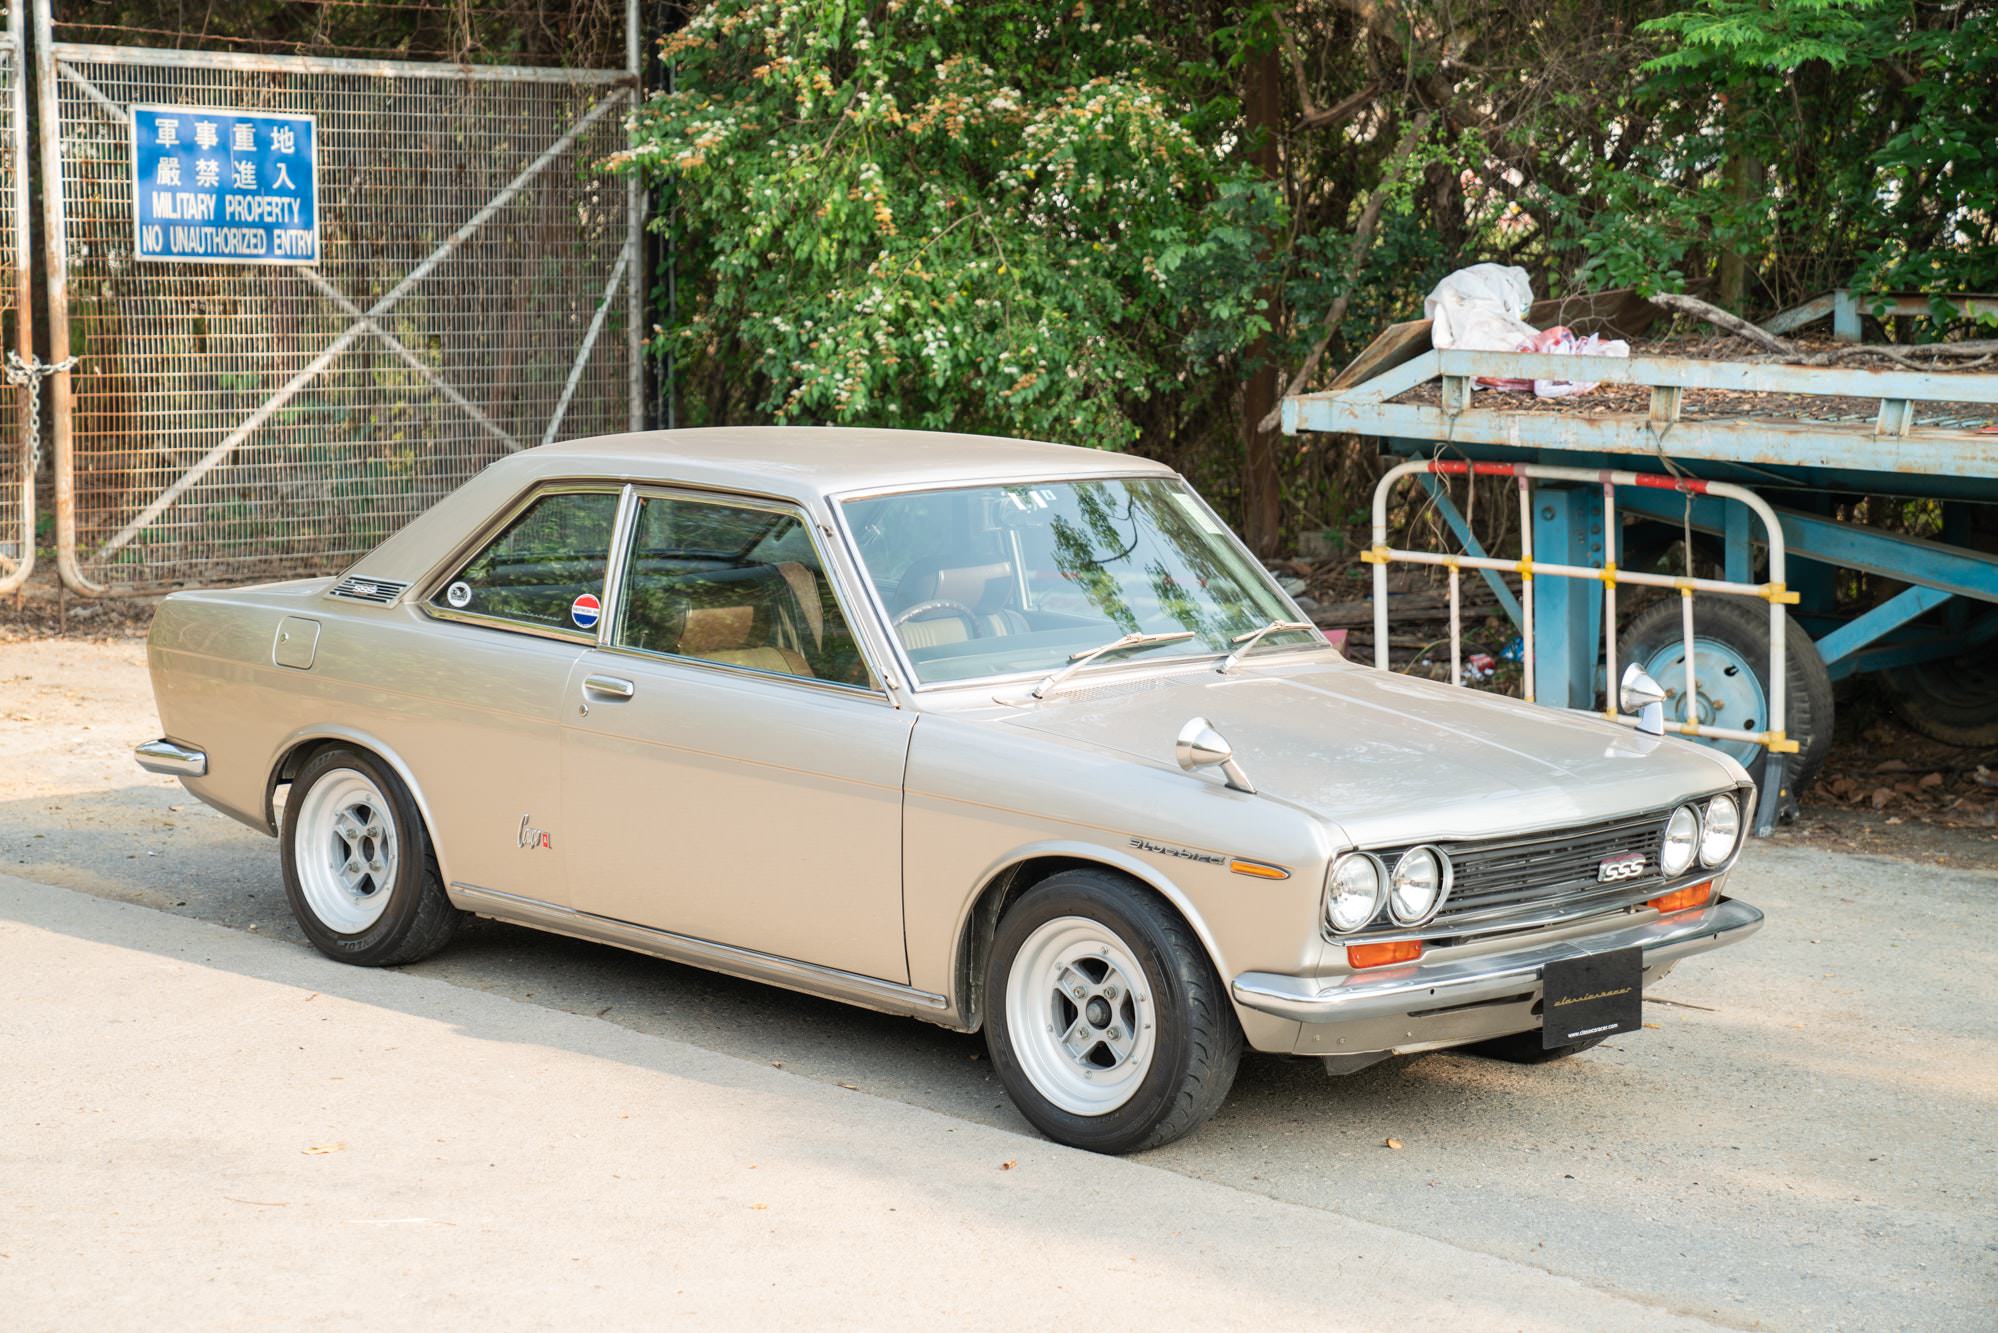 Datsun 510 SSS Coupe – The Japanese Car That Became A Rally Legend